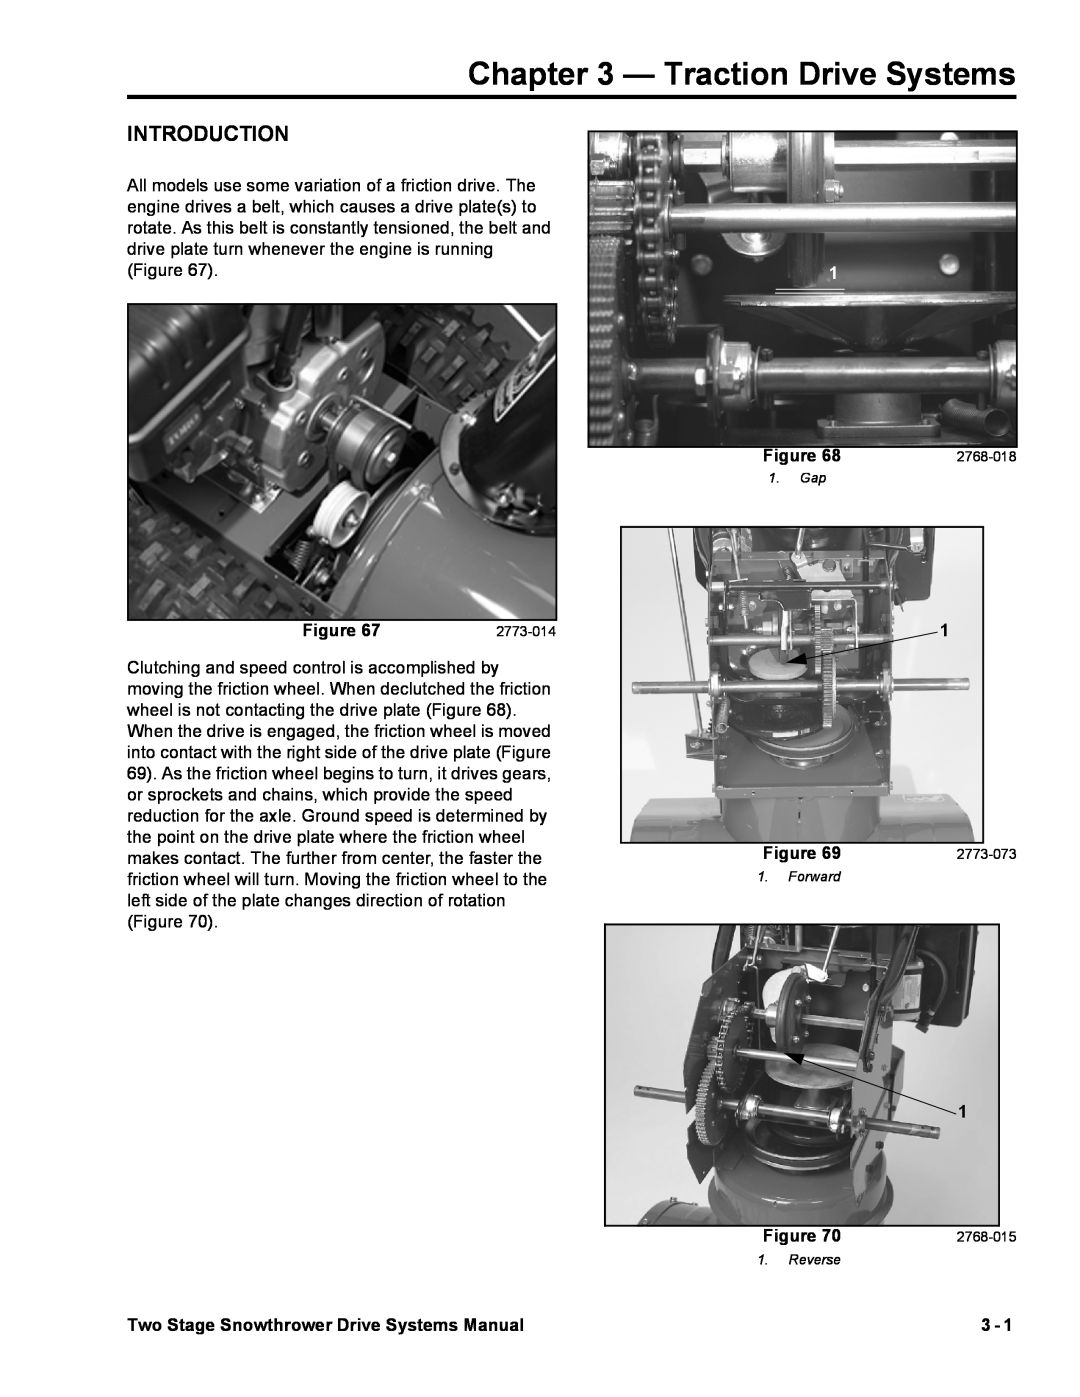 Toro 38065, 38080 Traction Drive Systems, Introduction, Two Stage Snowthrower Drive Systems Manual, Gap, Forward, Reverse 